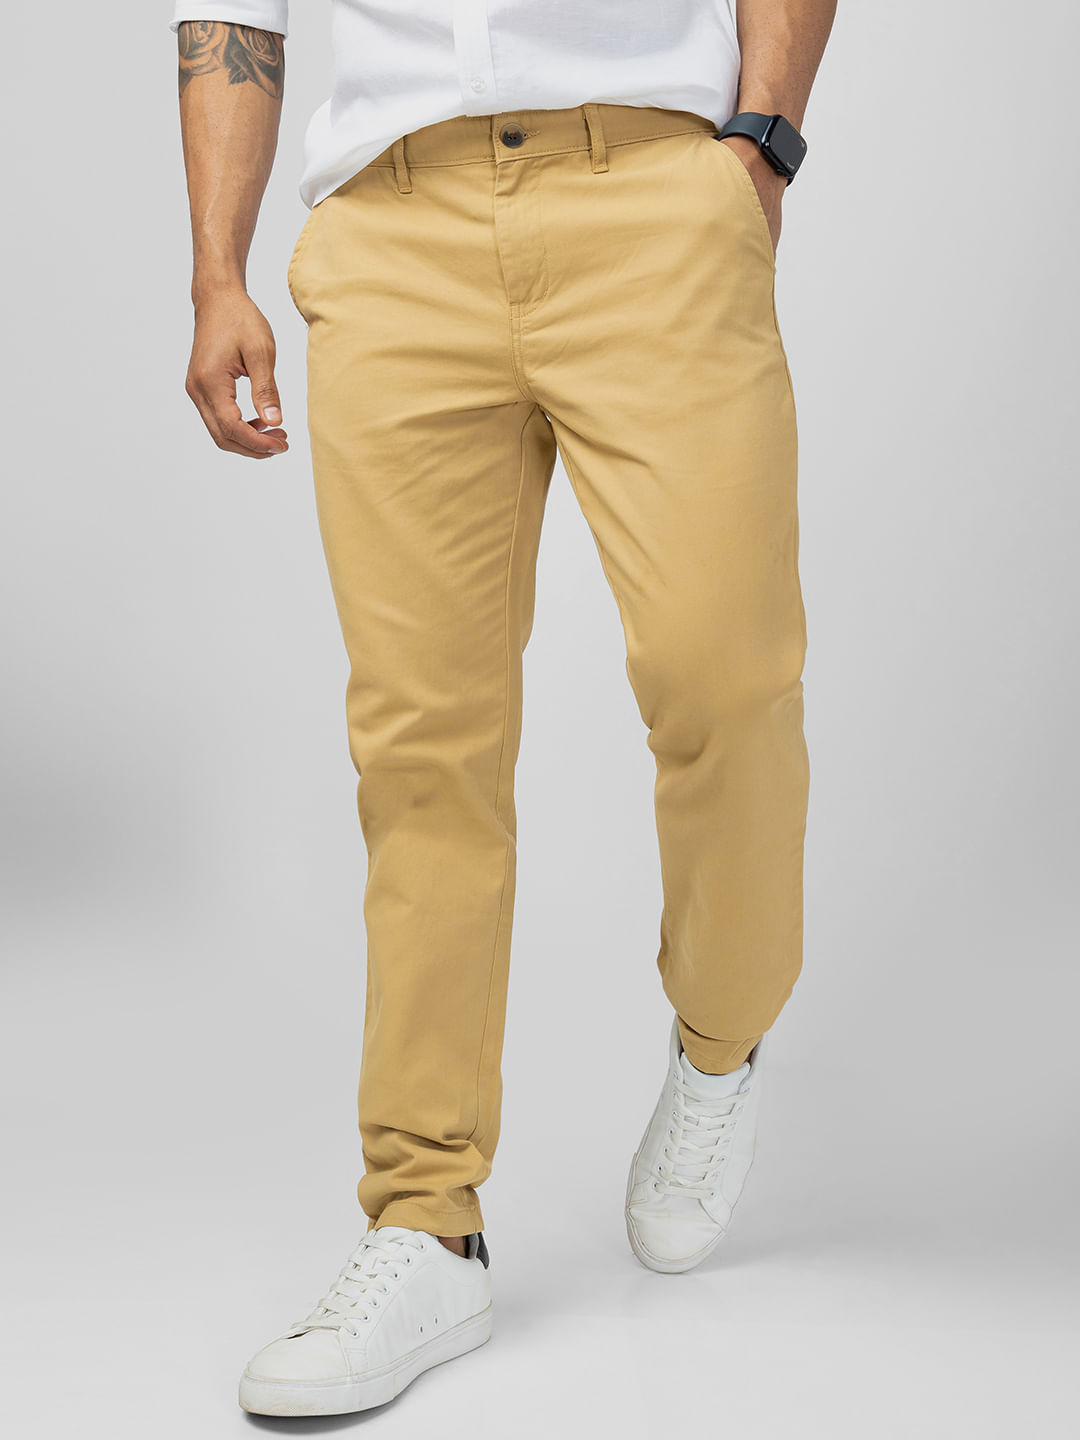 Must-Have Chino Colors for Men